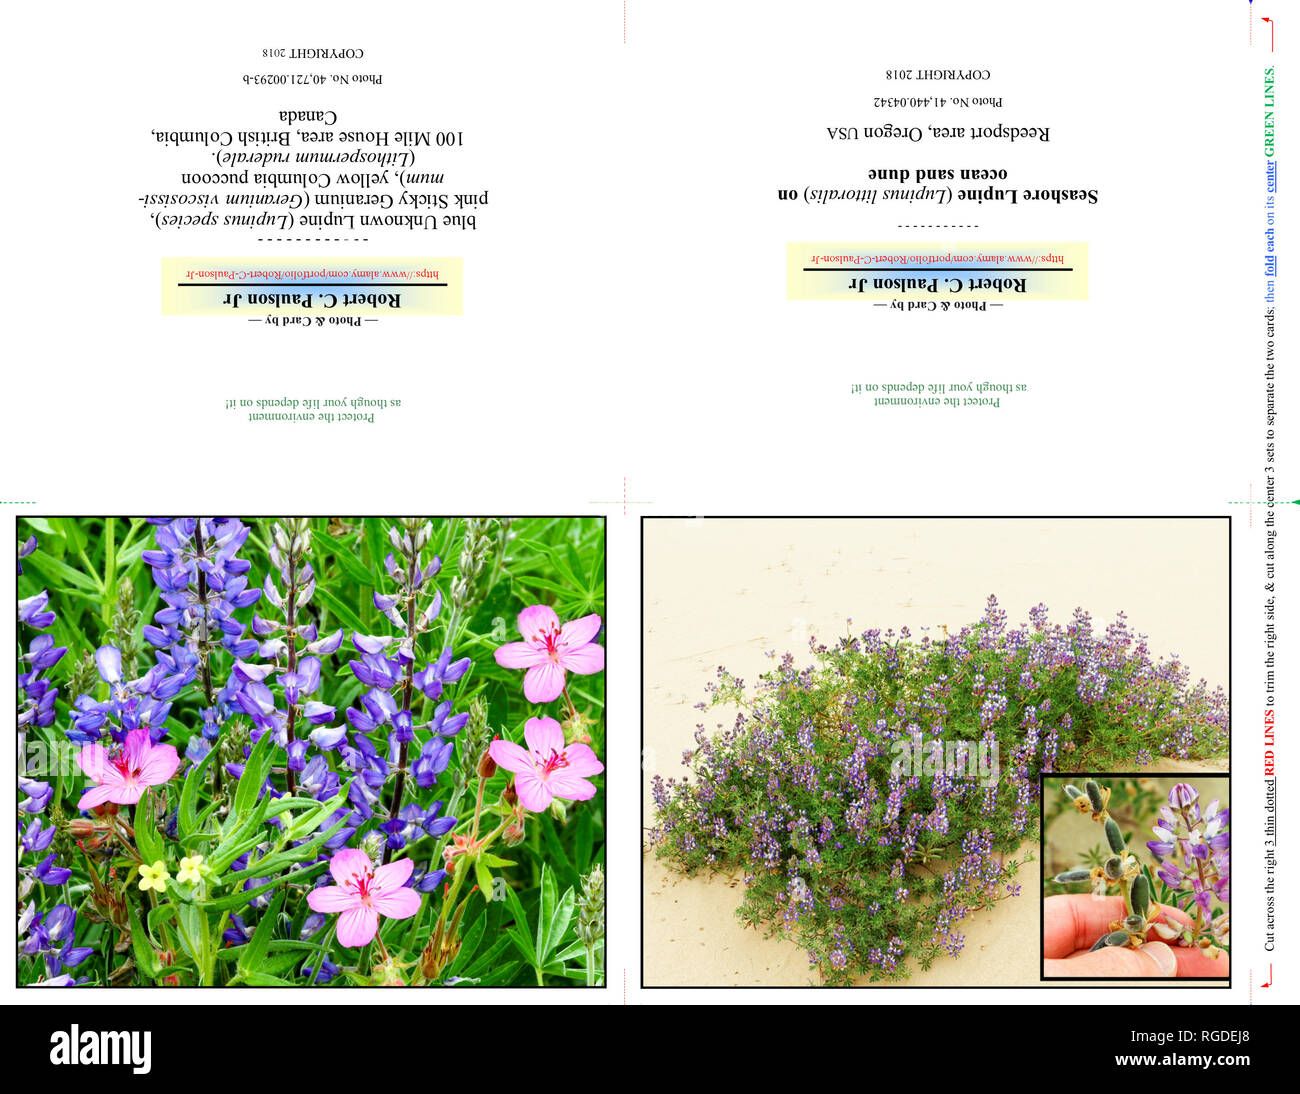 40,721.00293-b & 41,440.04342 Photography Photo Note Card, TWO 5x4 Cards on 11x8.5 paper (print cut fold), wildflowers blue Lupine, pink Geraniums Stock Photo